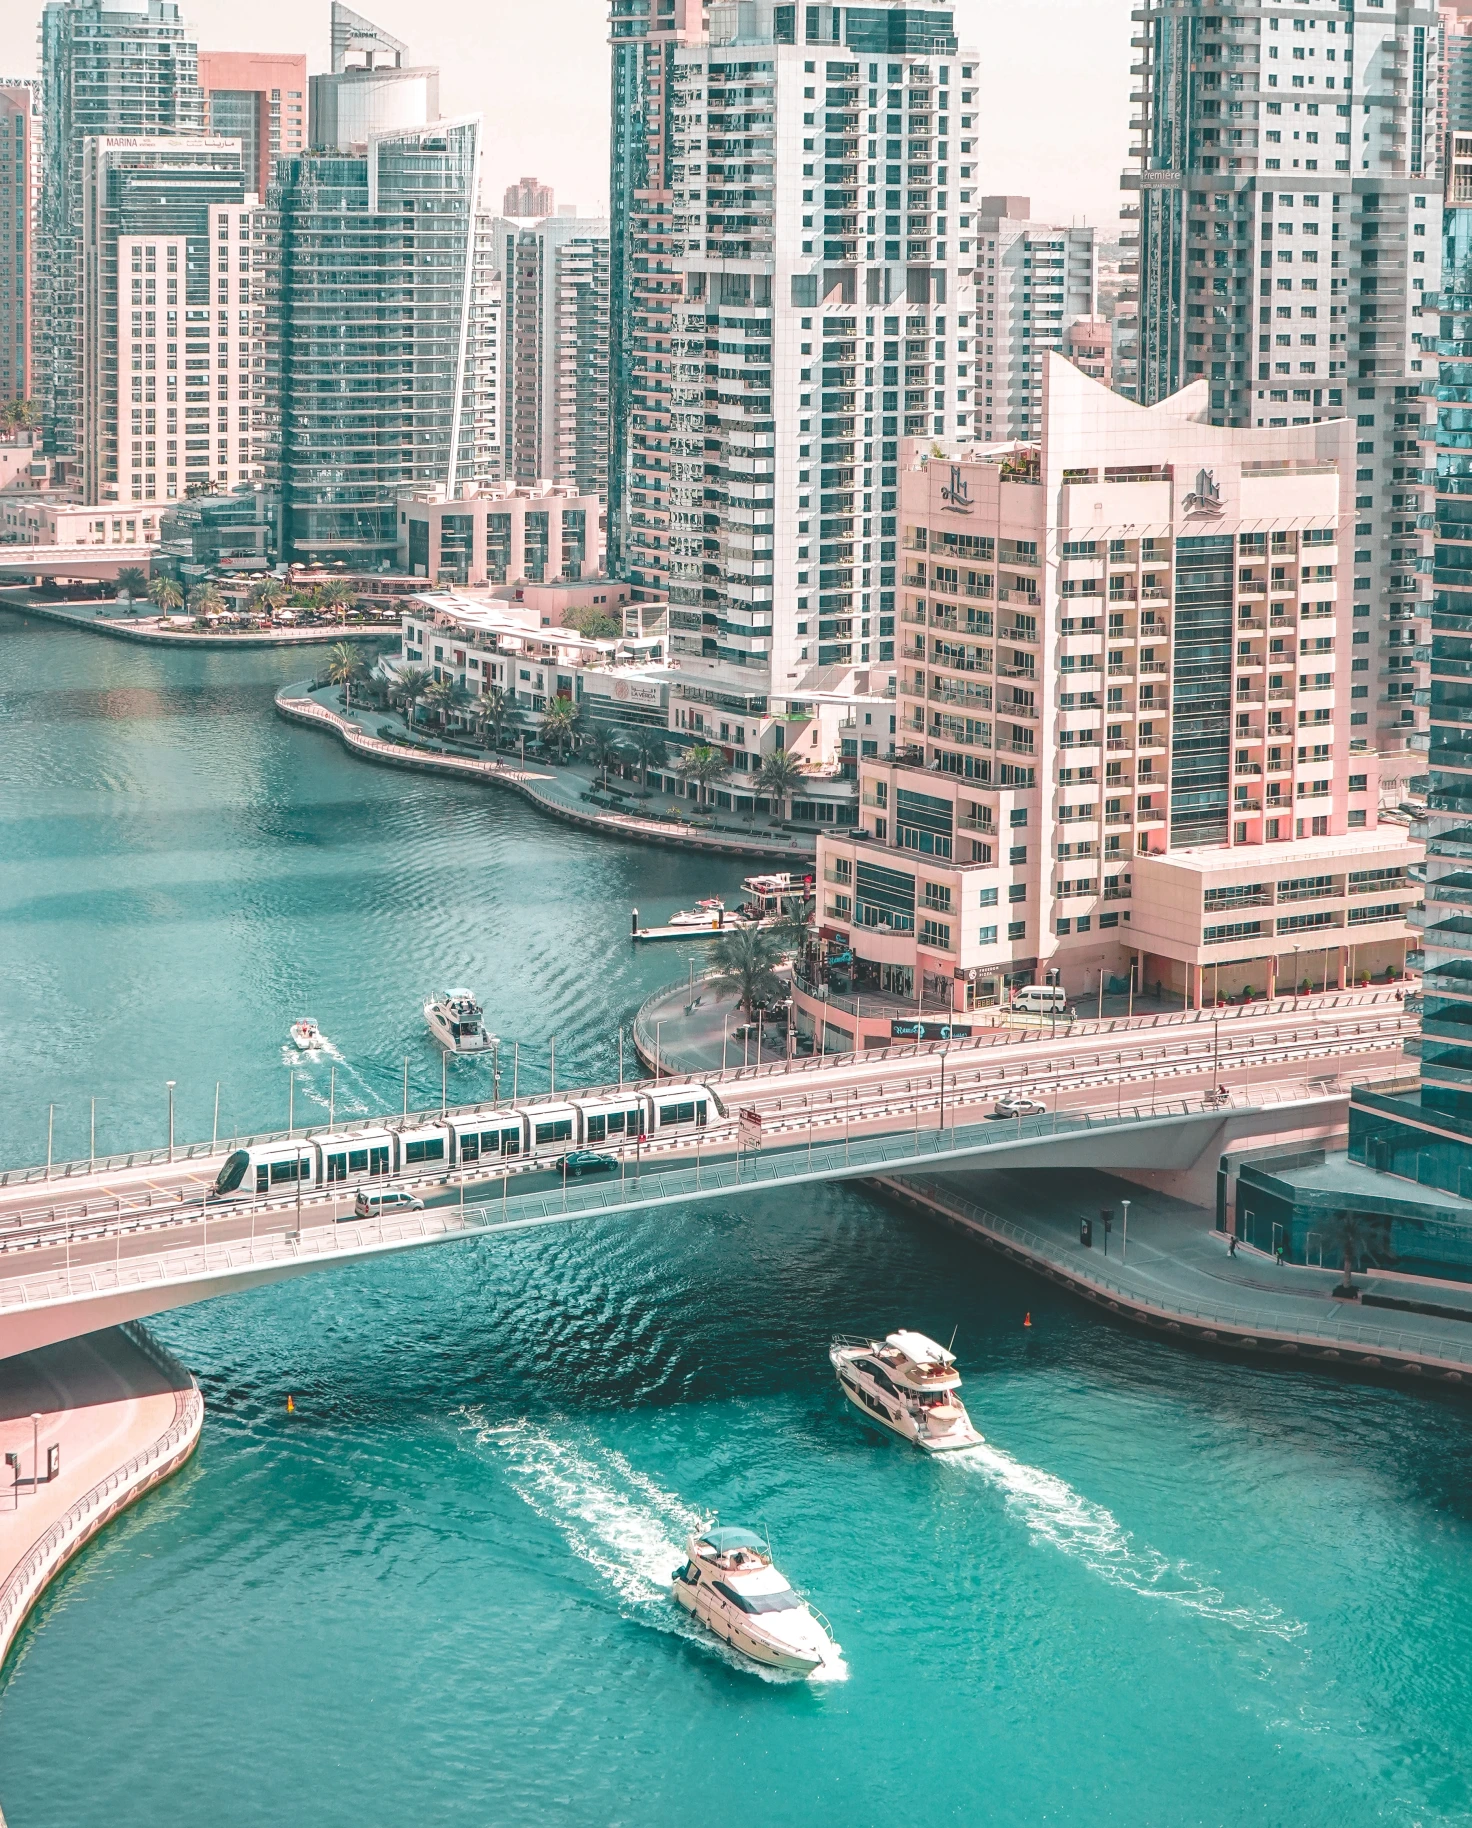 View of boats passing under bridge with buildings in the background in Dubai